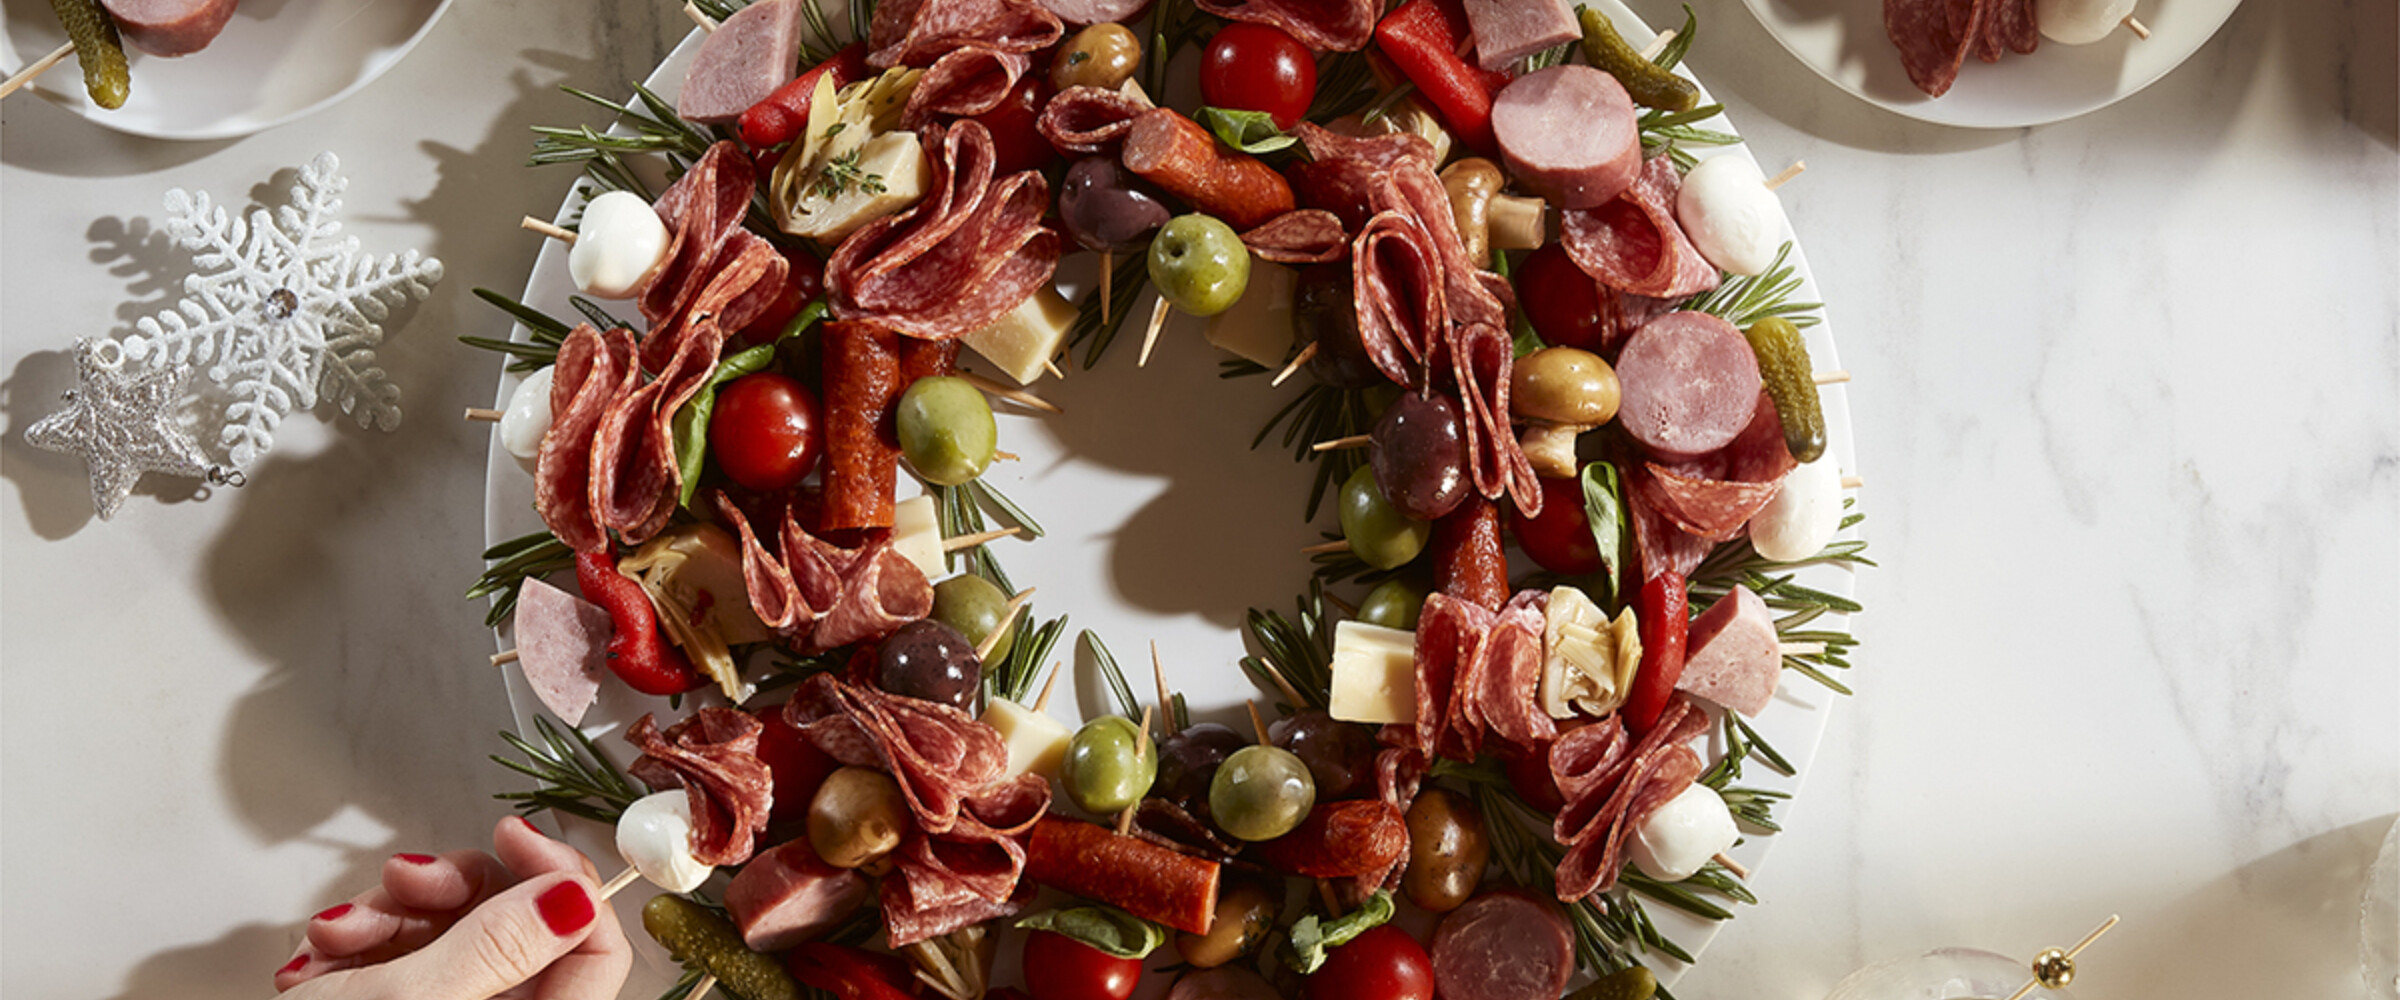 meats, cheese, veggies in the shape of a holiday wreath